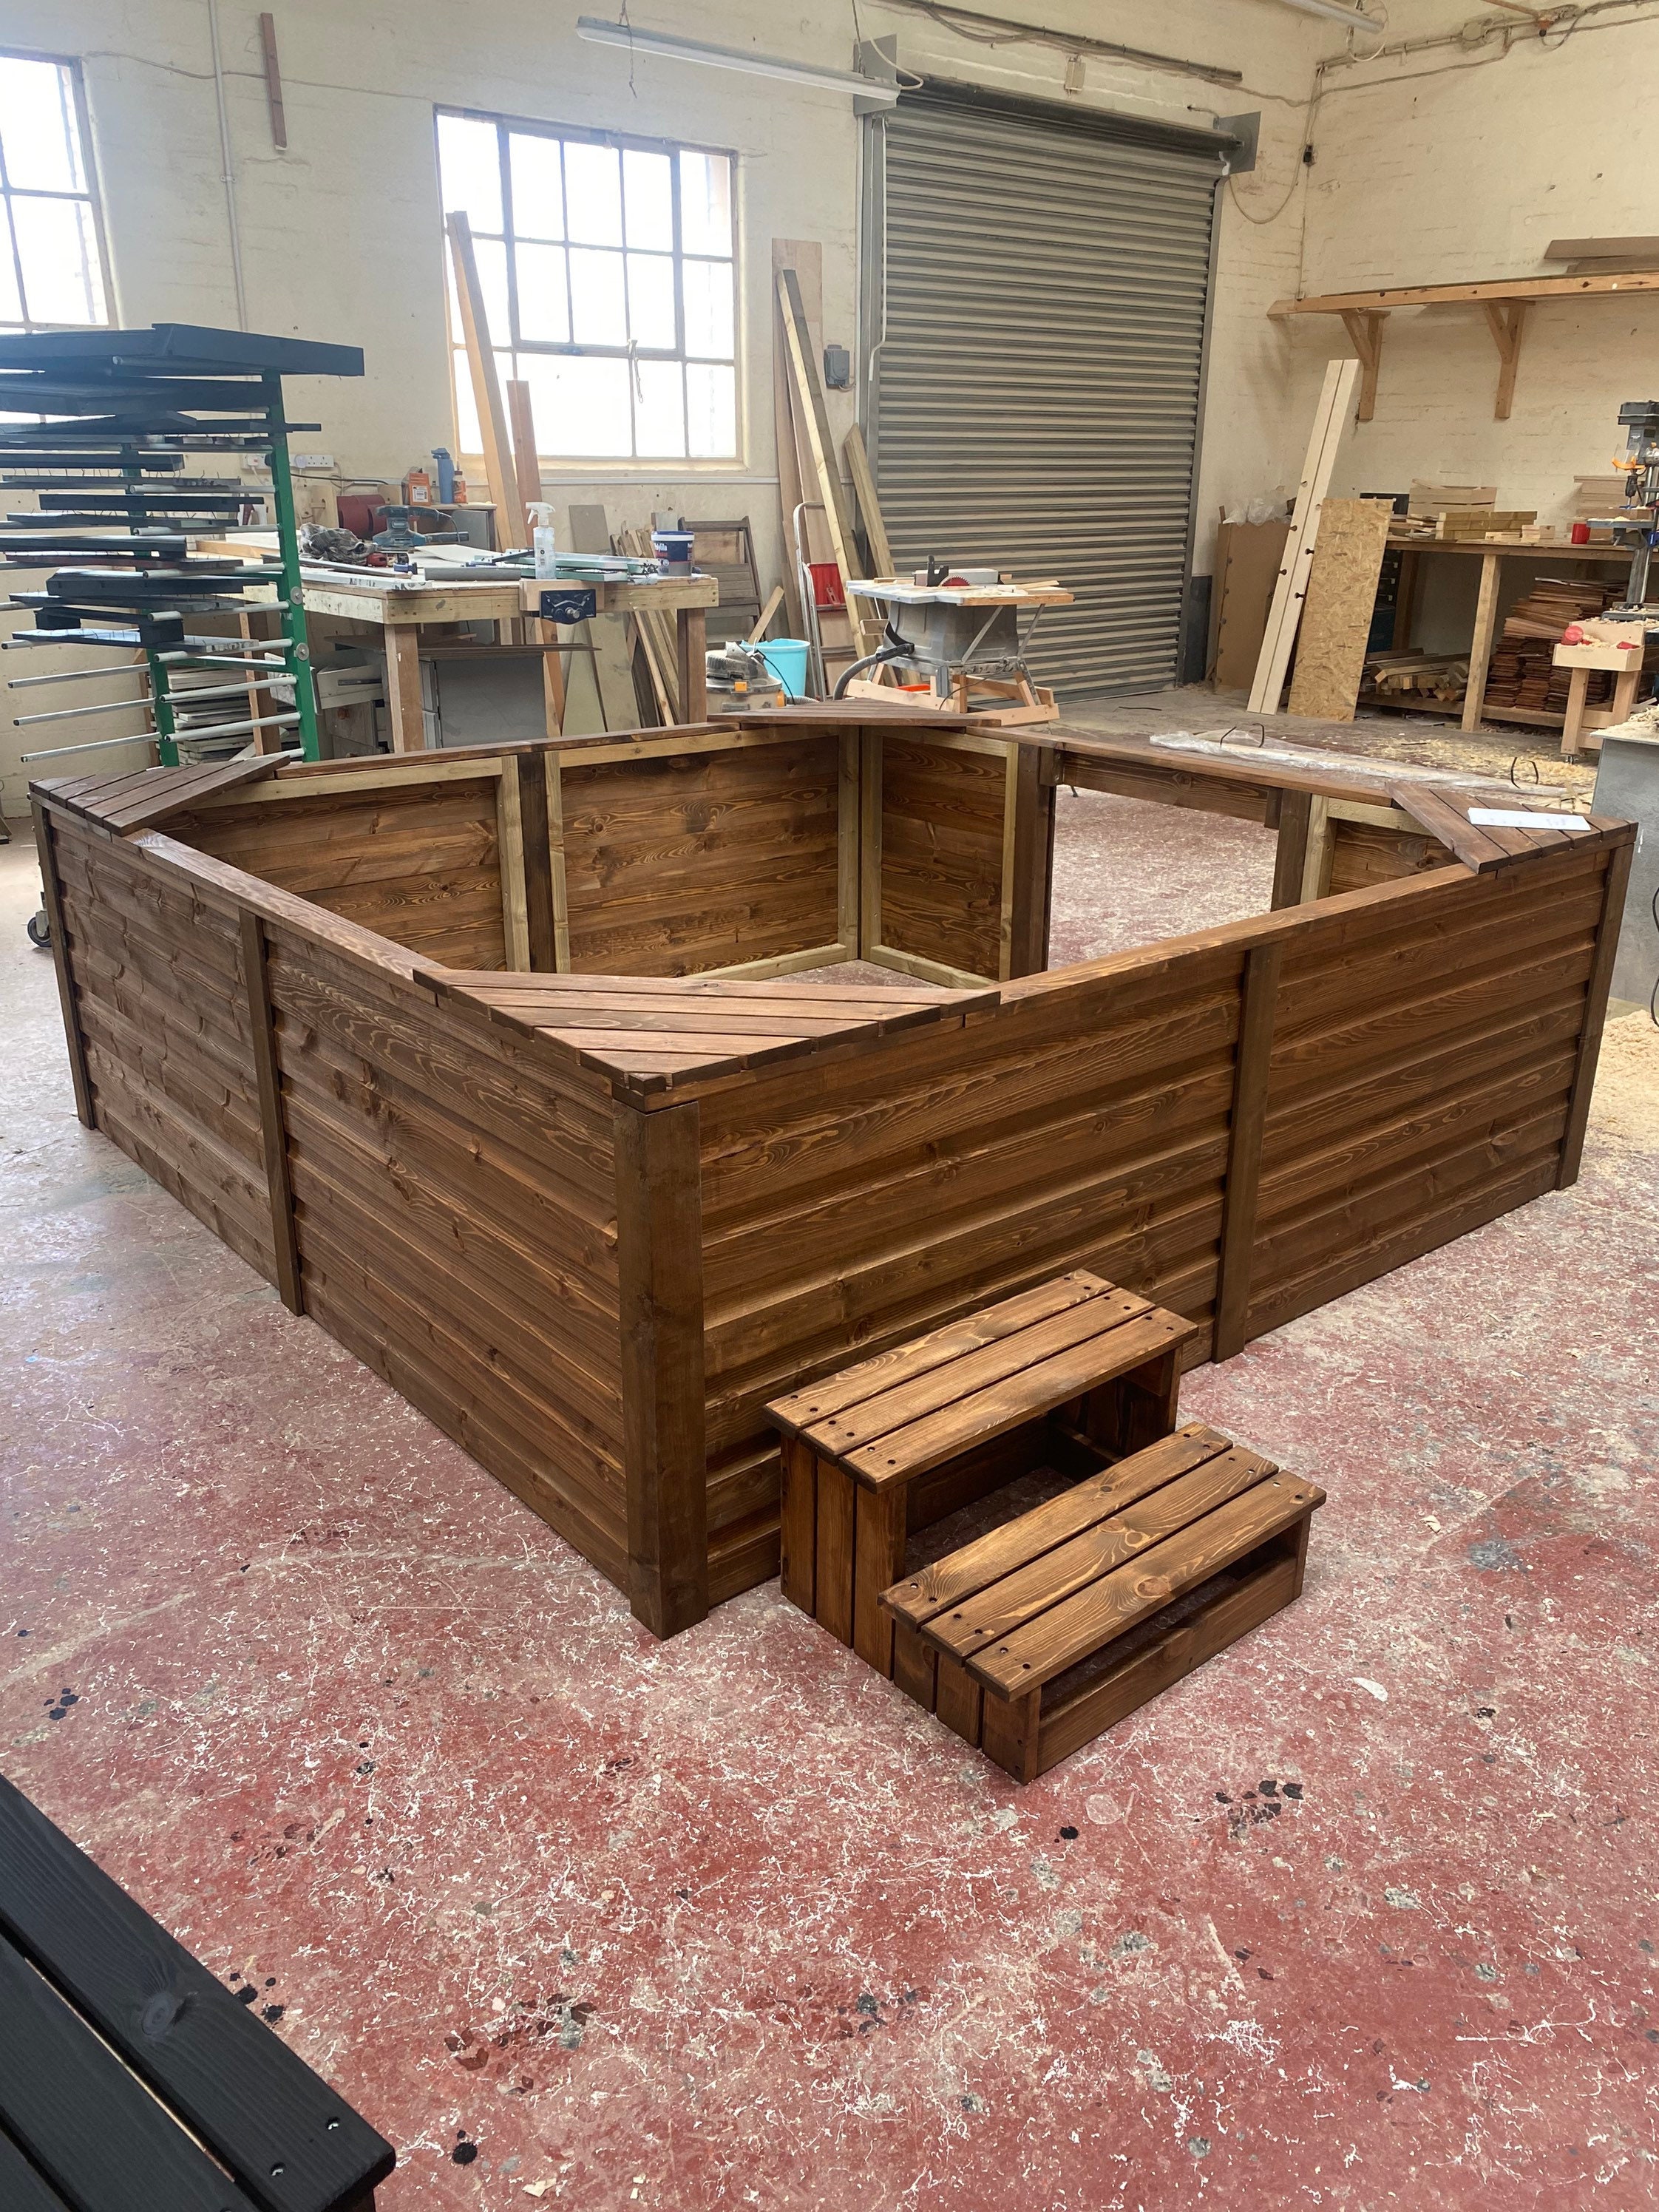 Hot Tub Wooden Surround/bespoke/ Handmade / Free Delivery /